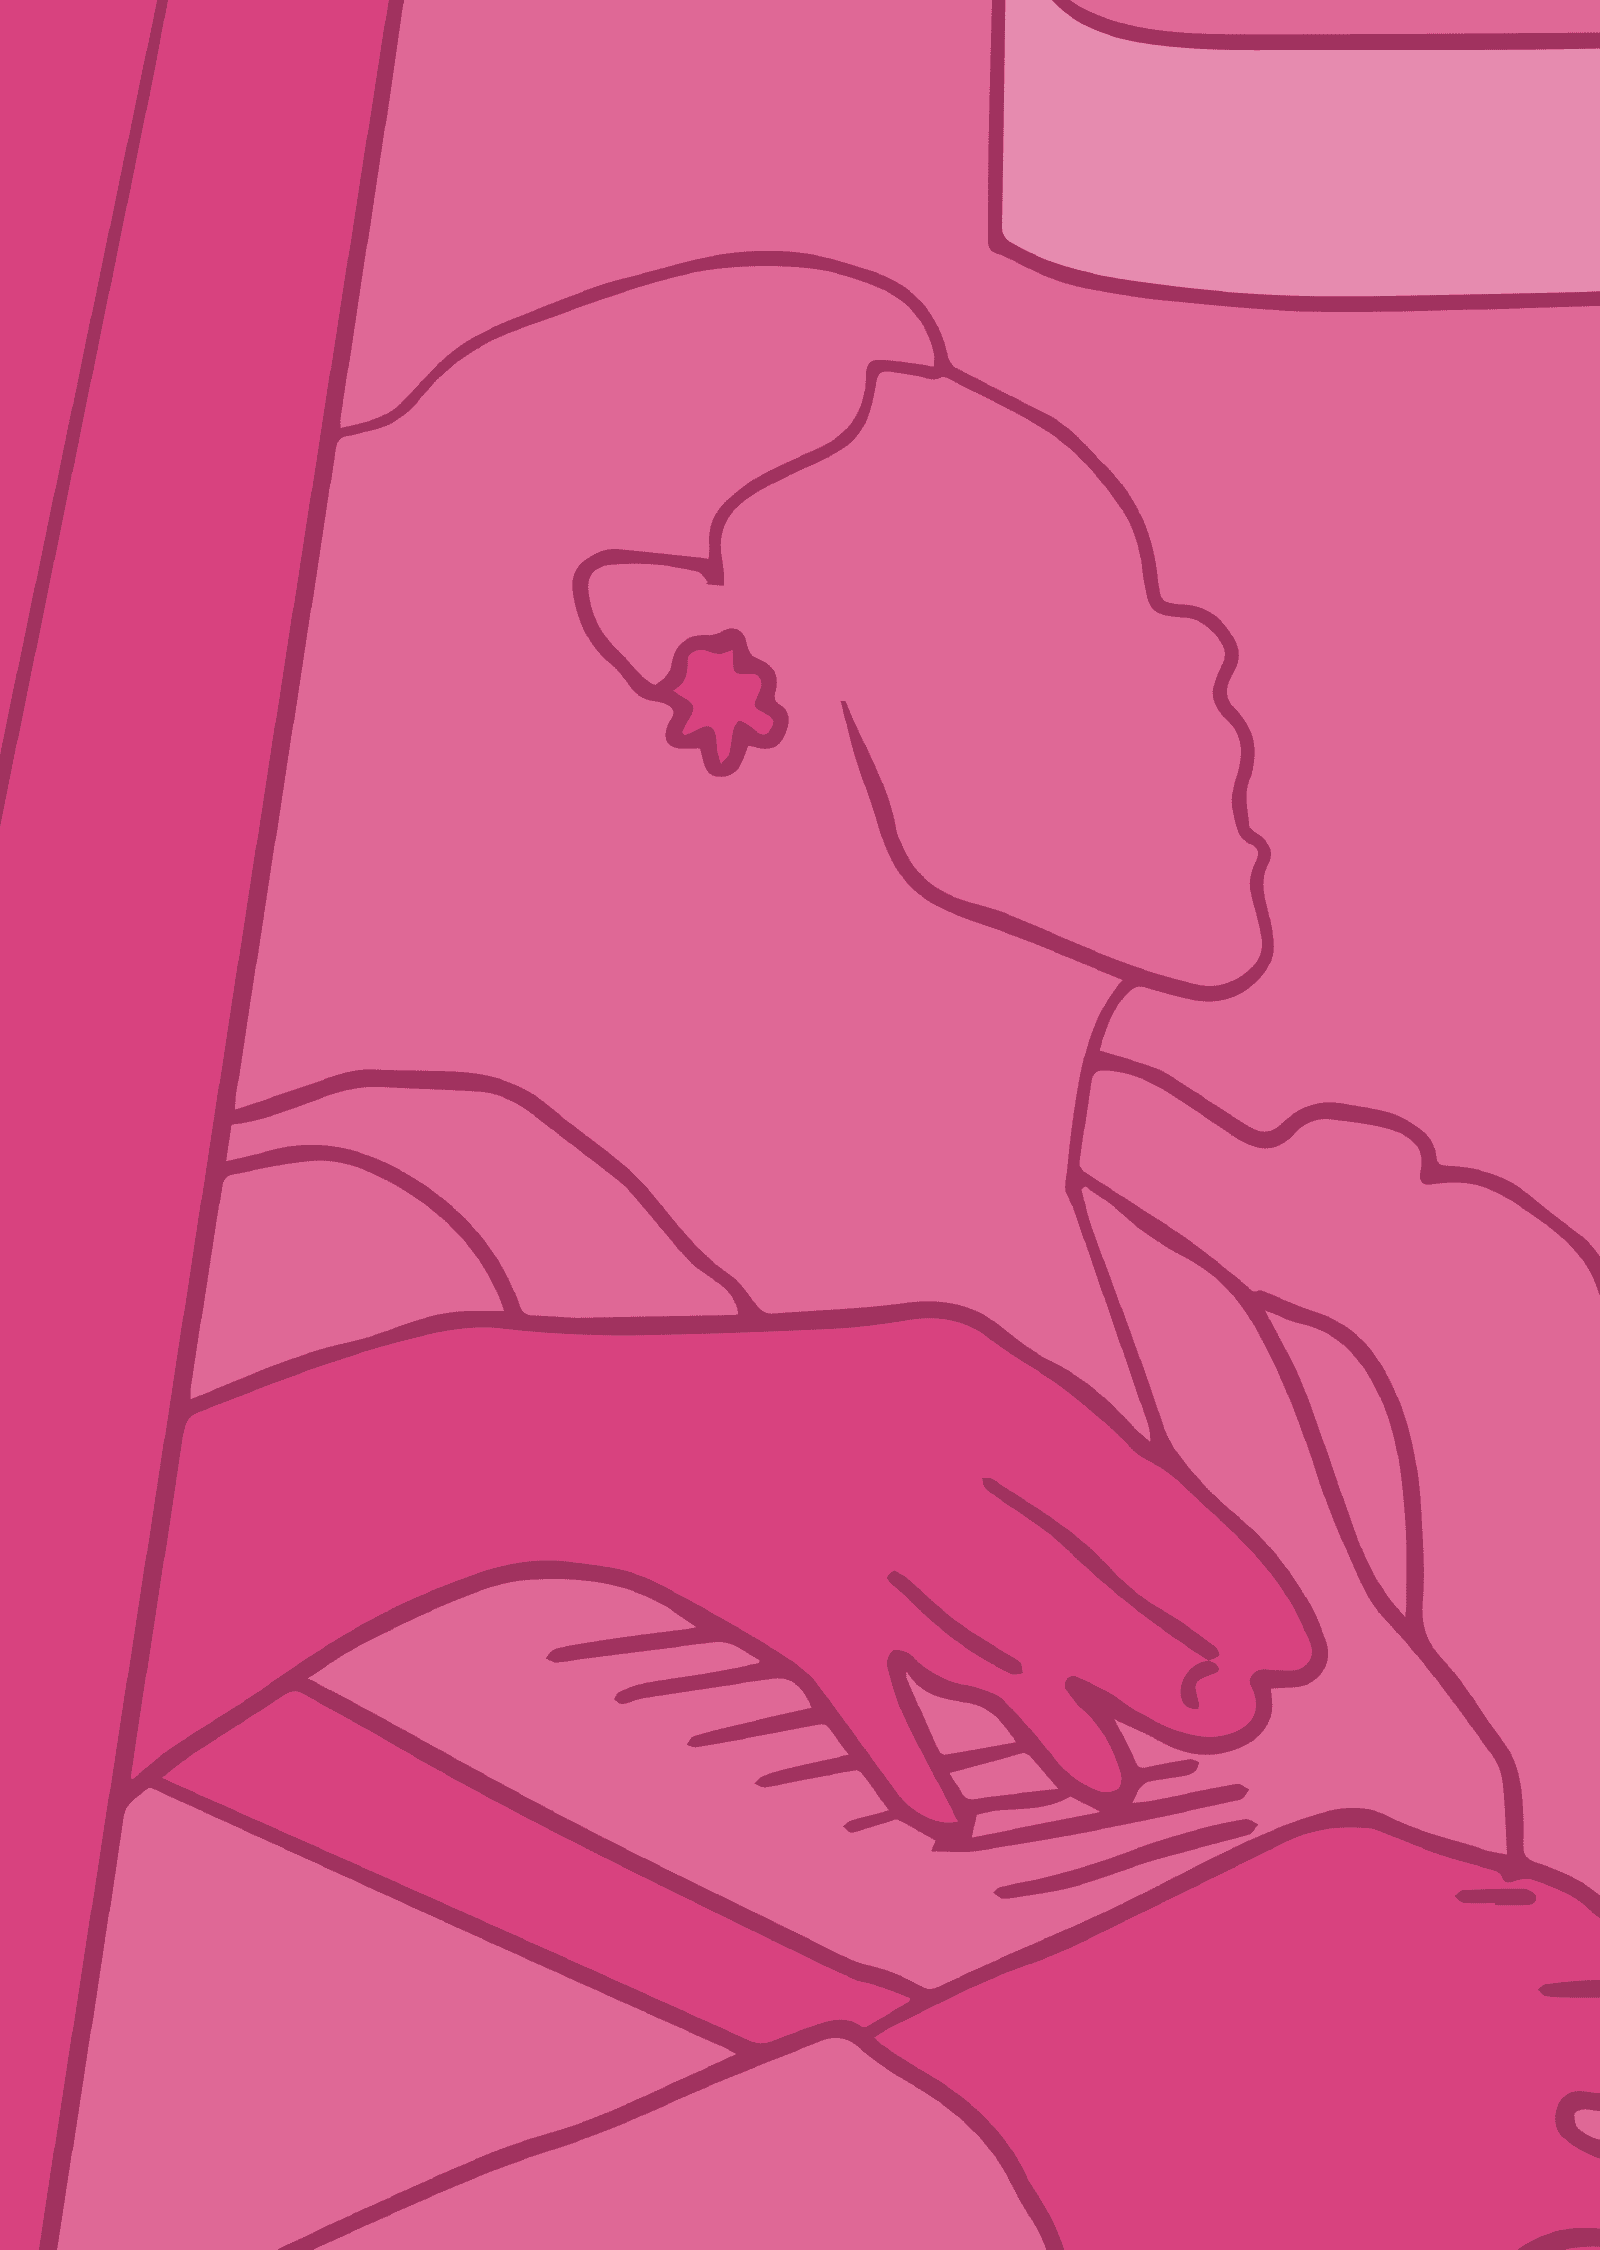 An illustration of a musical mural in monochromatic pink